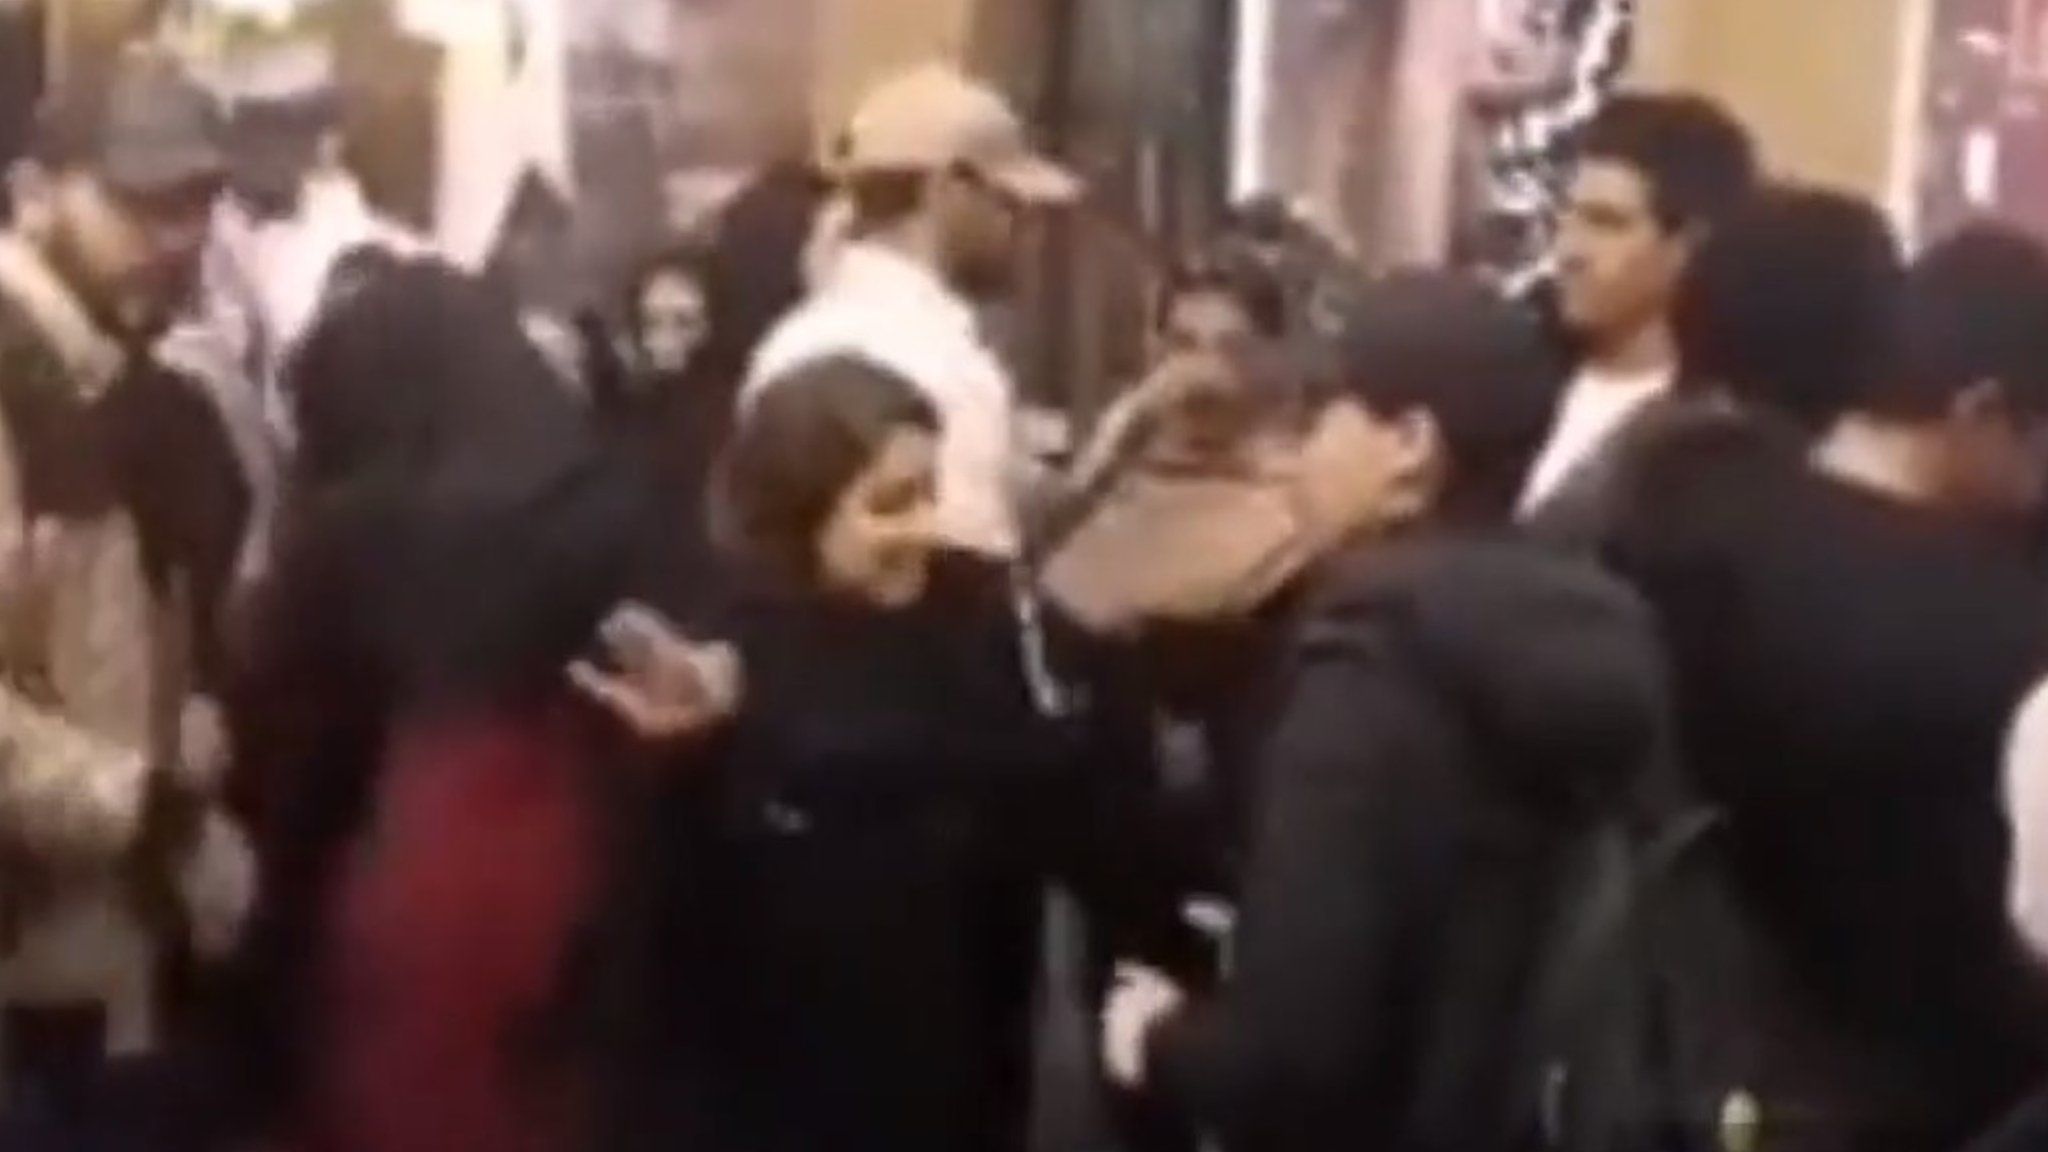 Video purportedly showing men and women dancing at a shopping centre in Mashhad, Iran